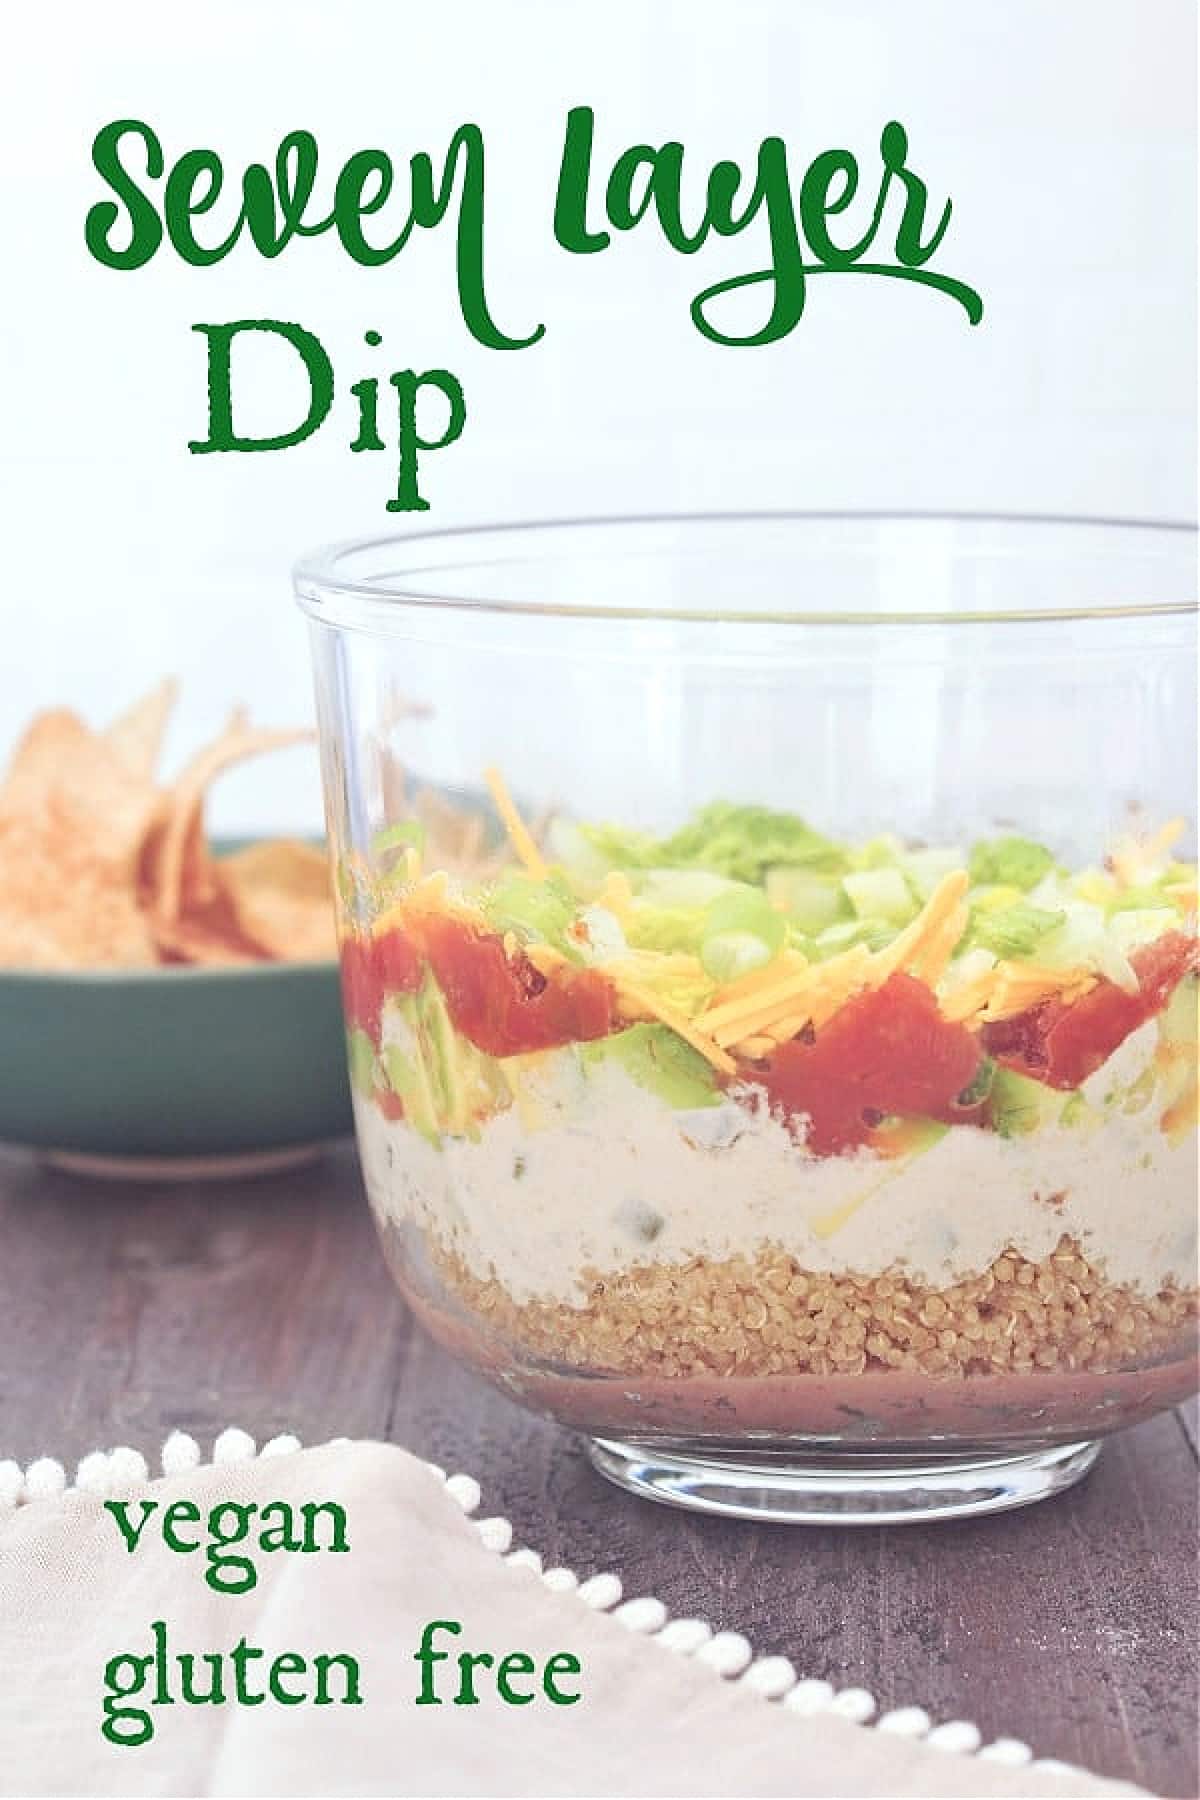 Side view of all the layers in dairy free seven layer dip: beans, quinoa, cashew cheese sauce, avocado, tomato, green onions and lettuce.